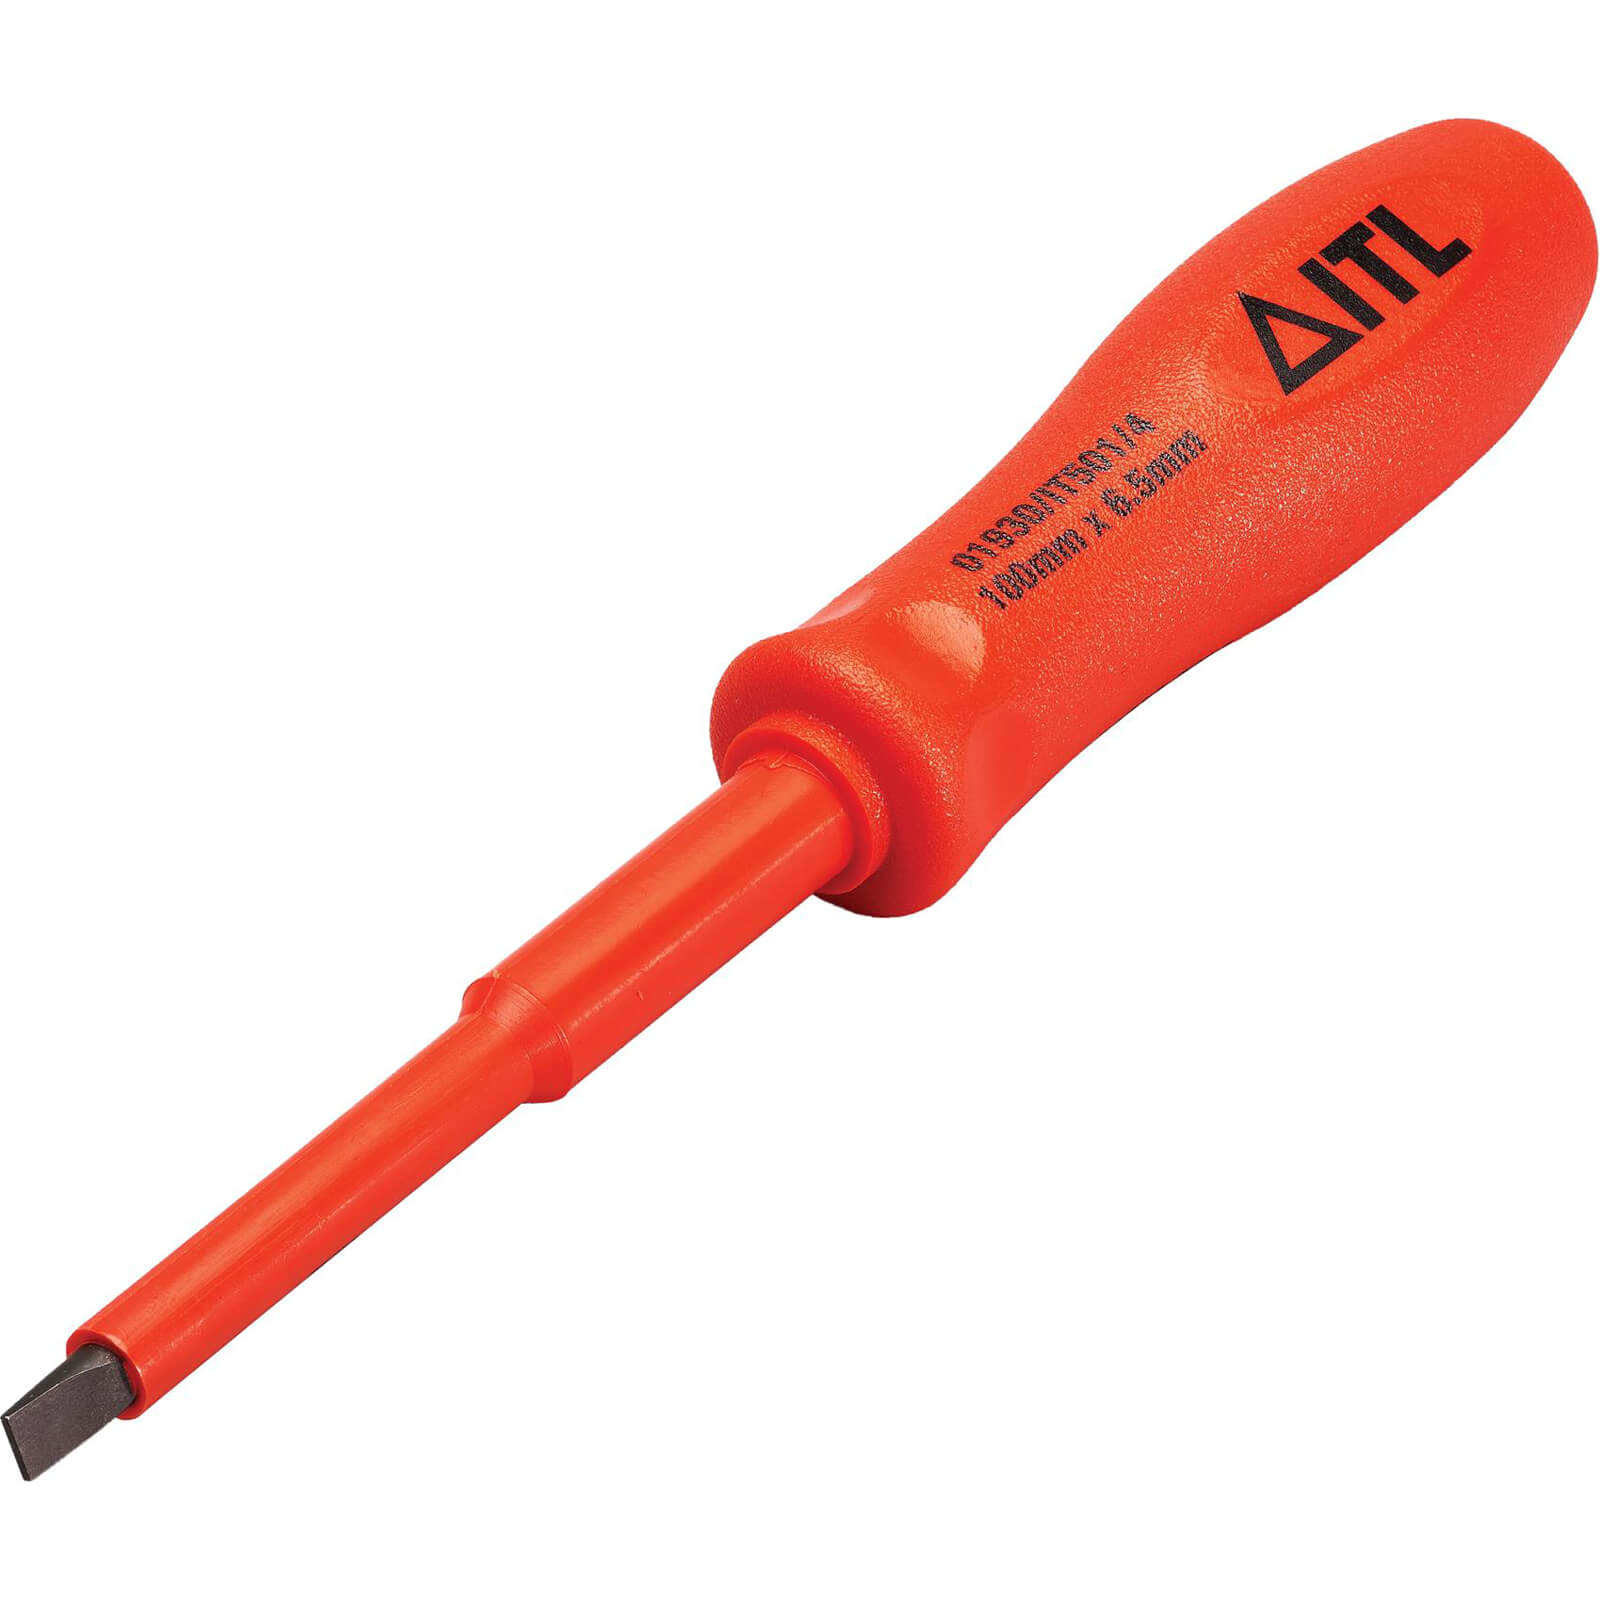 Image of ITL Insulated Parallel Slotted Engineers Screwdriver 6.5mm 100mm